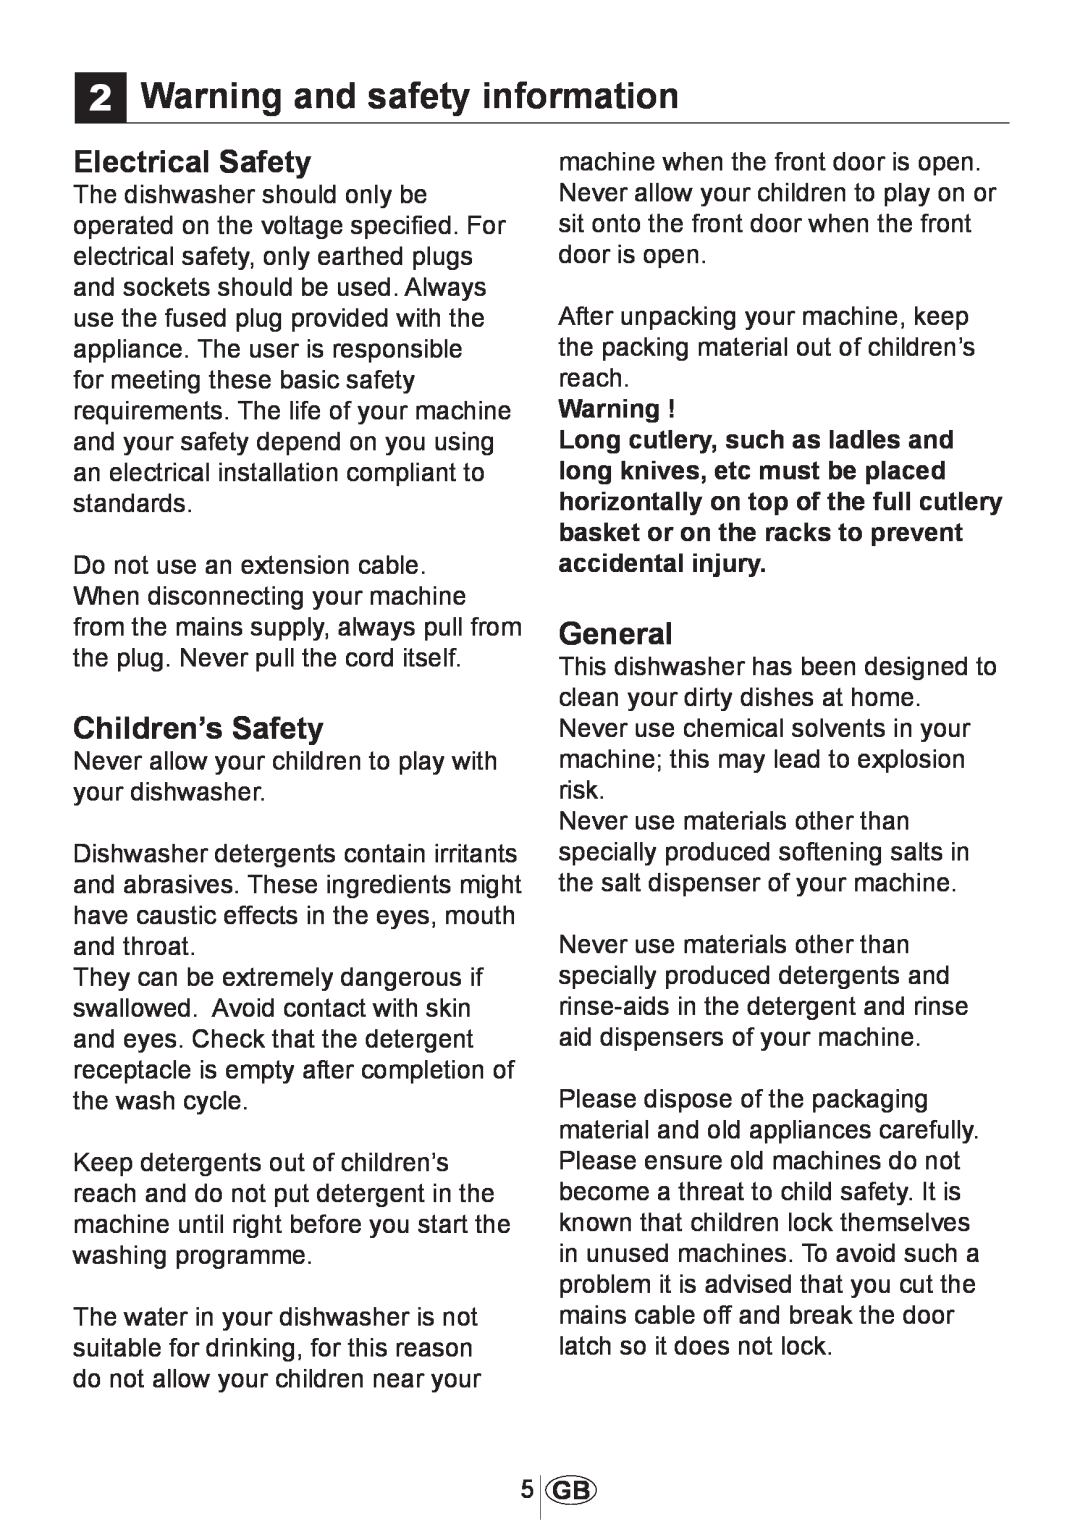 Beko DWD5414 manual 2Warning and safety information, Electrical Safety, Children’s Safety, General 